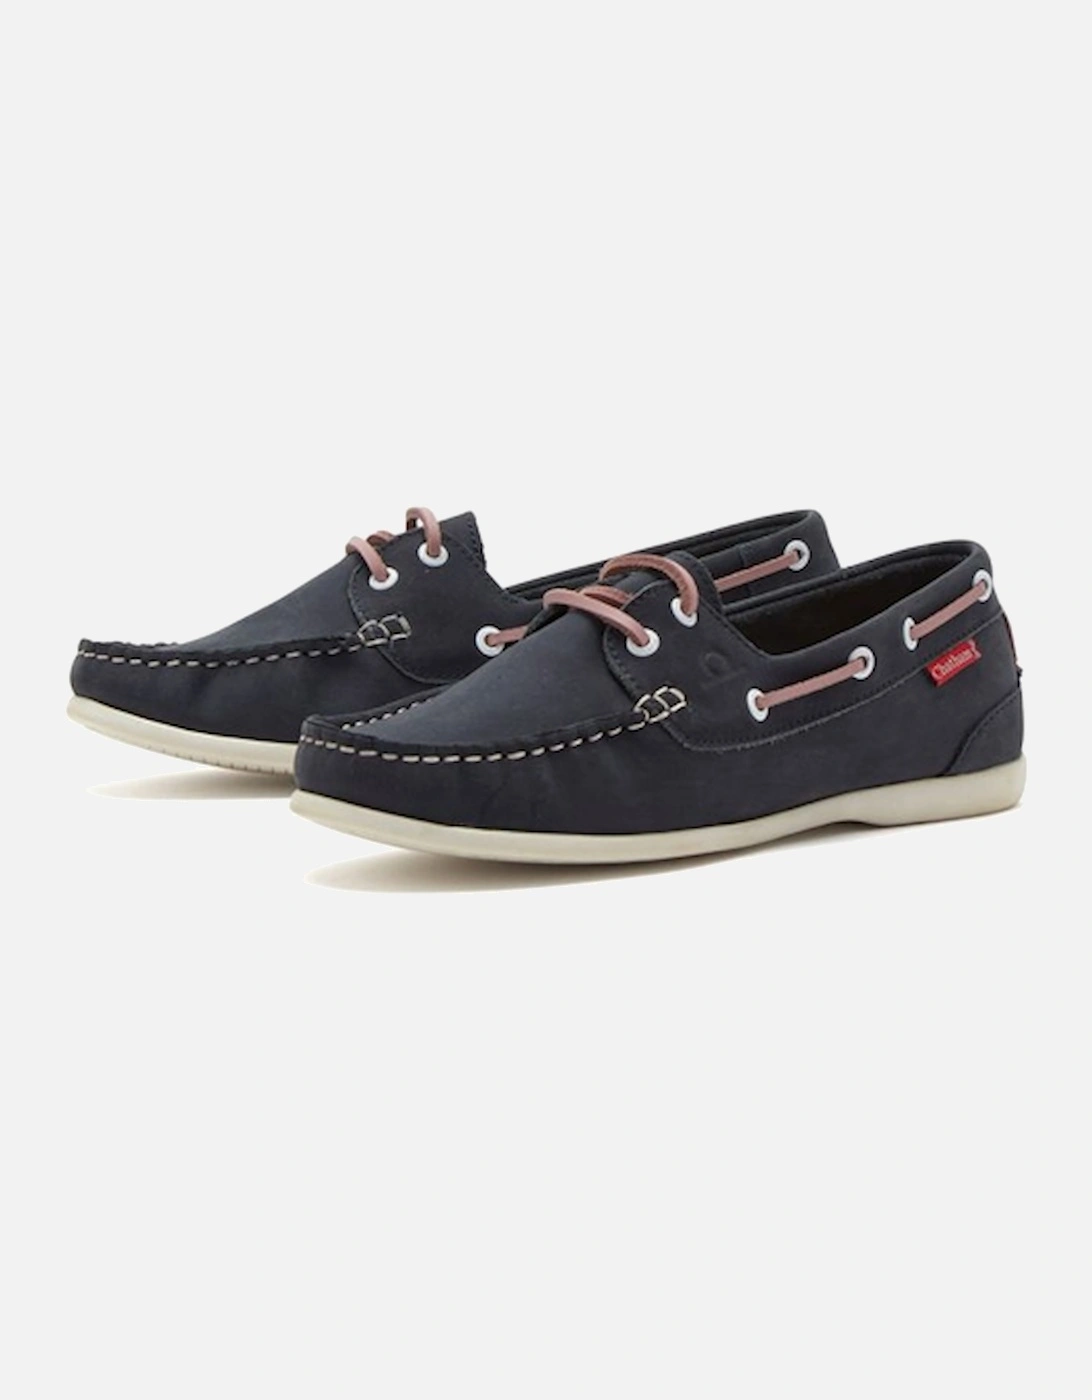 Women's Penang Leather Boat Shoe Navy/Pink